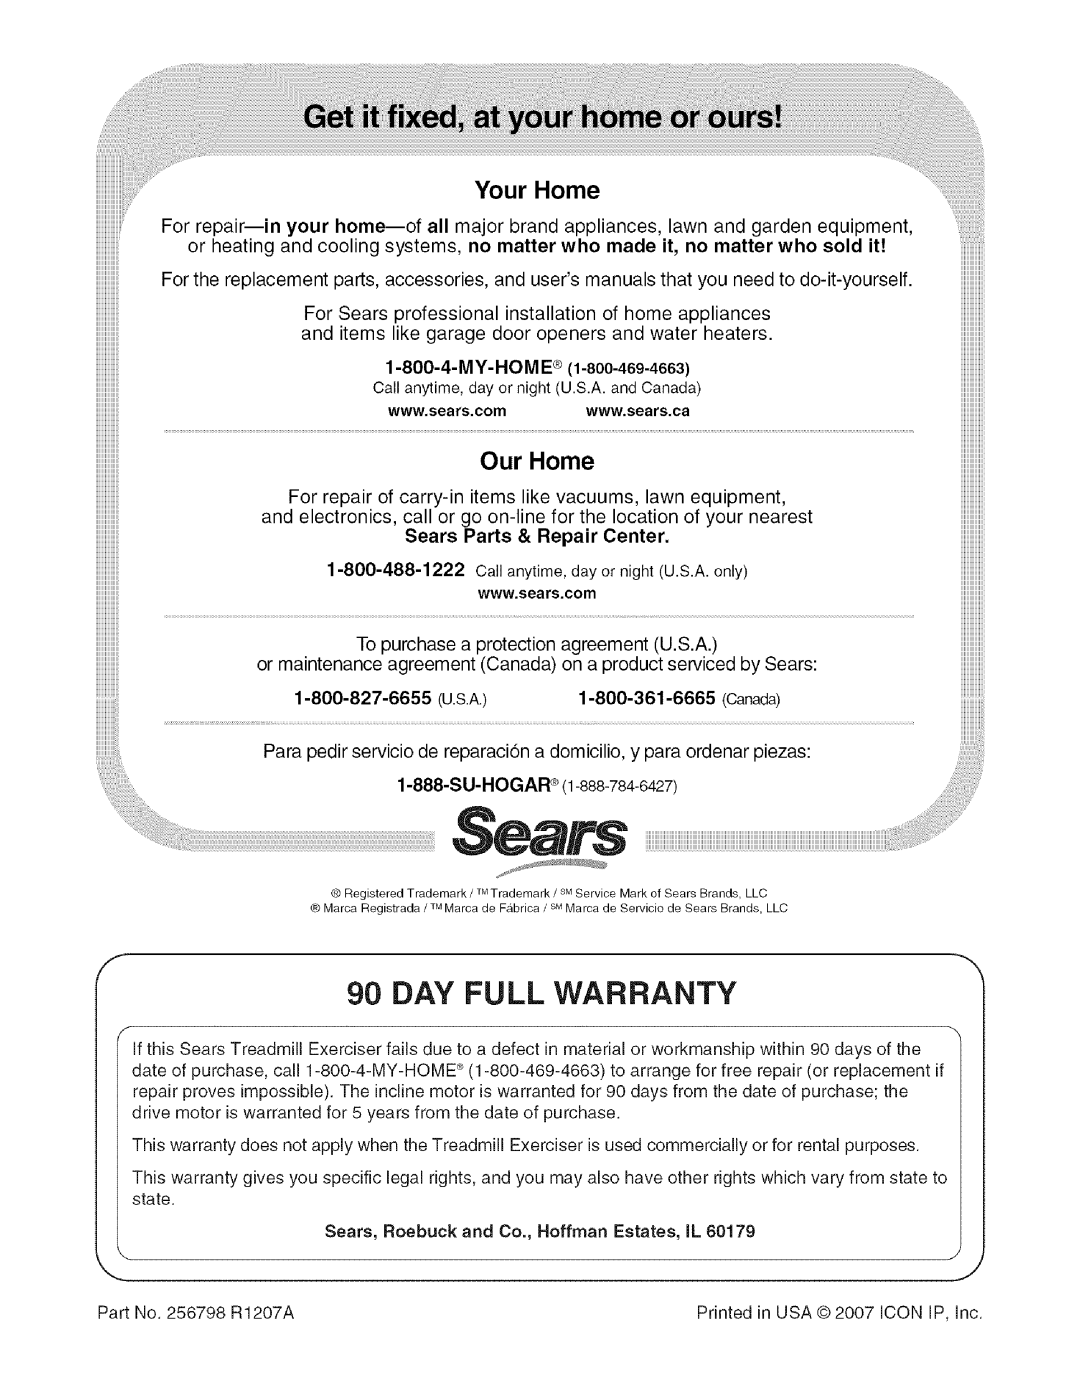 Sears 831.24733.0 Day Full Warranty, Our Home, Your Home, or maintenance agreement Canada on a product serviced by Sears 